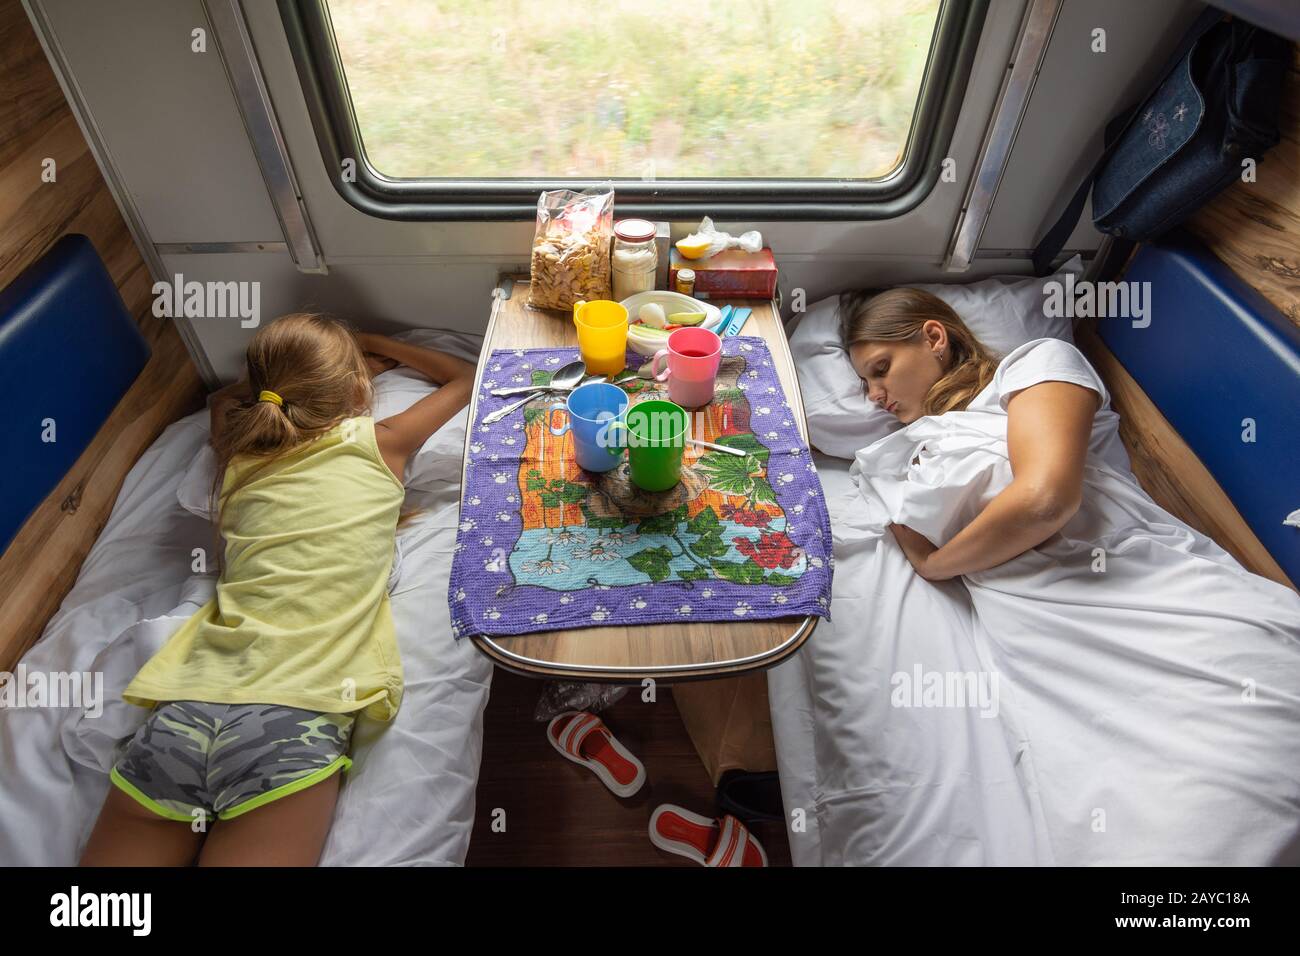 The situation on the train, mom and daughters are sleeping on the lower shelves in the car Stock Photo